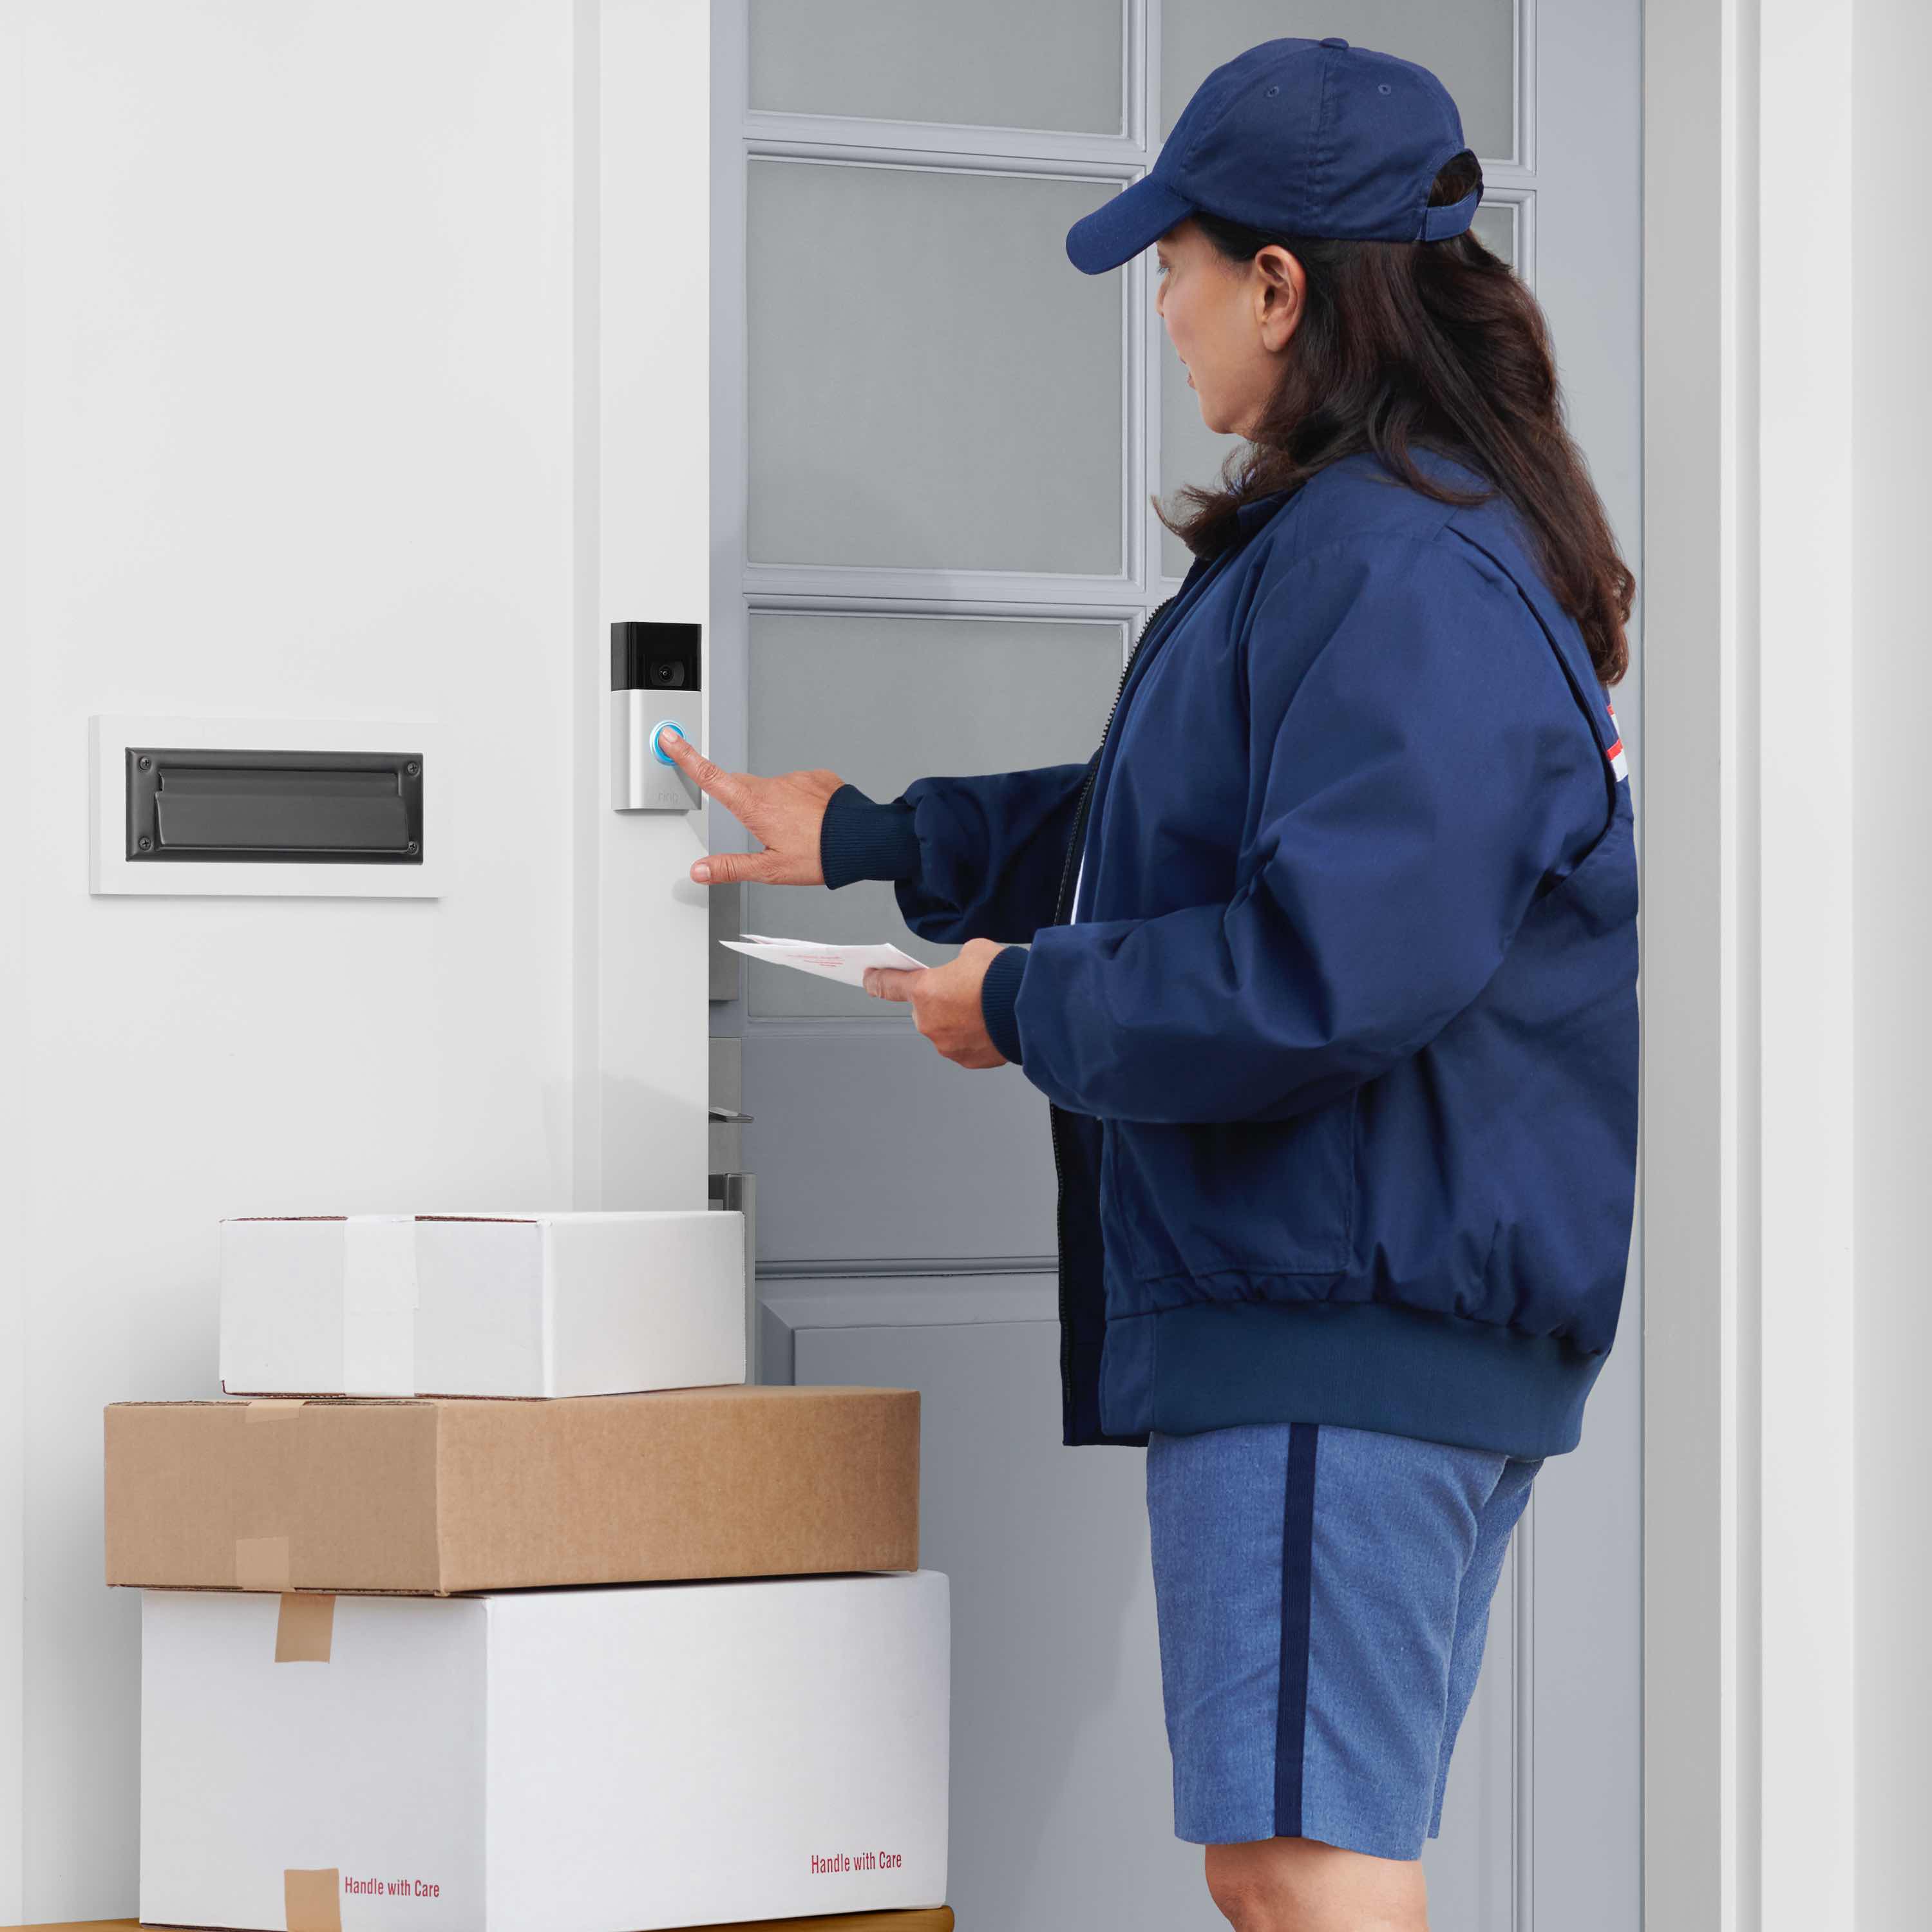 Video Doorbell (2nd Generation) (for Certified Refurbished) - Postal worker with packages pressing button on Video Doorbell 2nd Generation mounted next to front door of home.